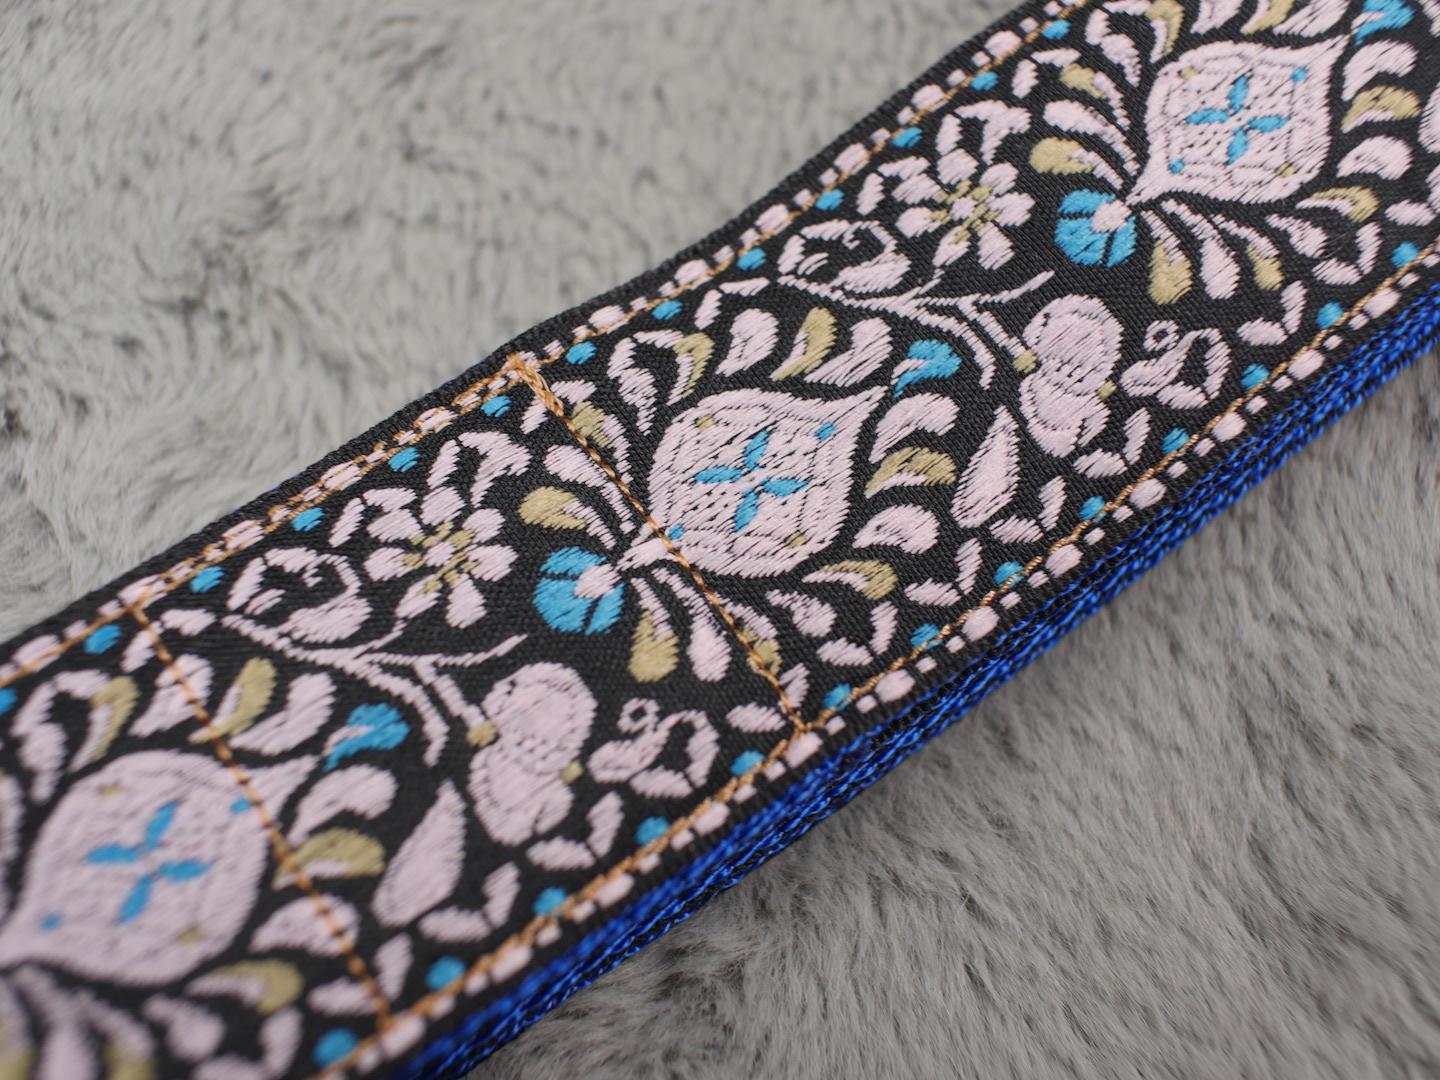 Air Straps Limited Edition 'Oceania' Guitar Strap